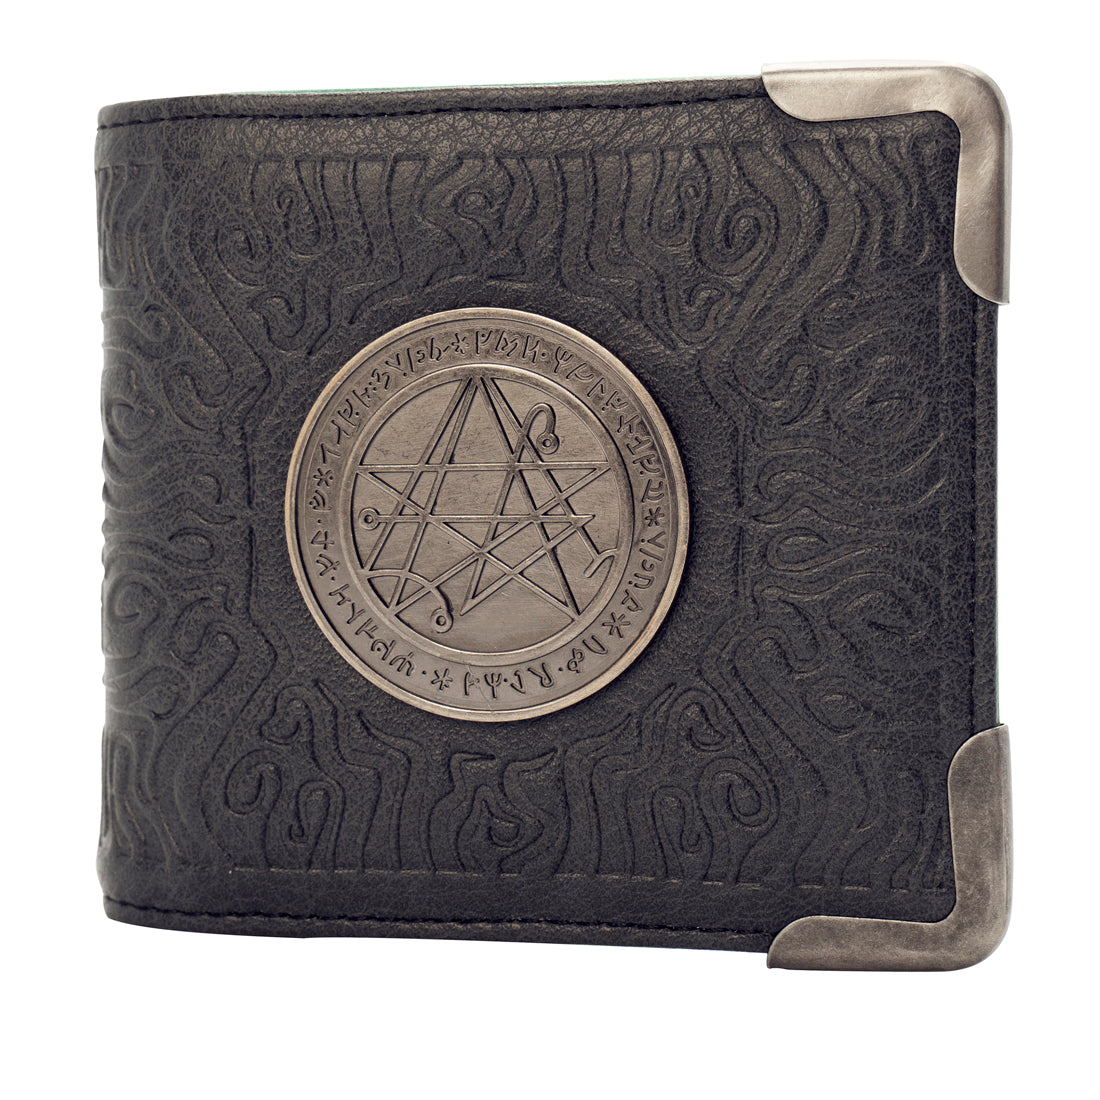  Cthulhu Premium Wallet HP Lovecraft Style